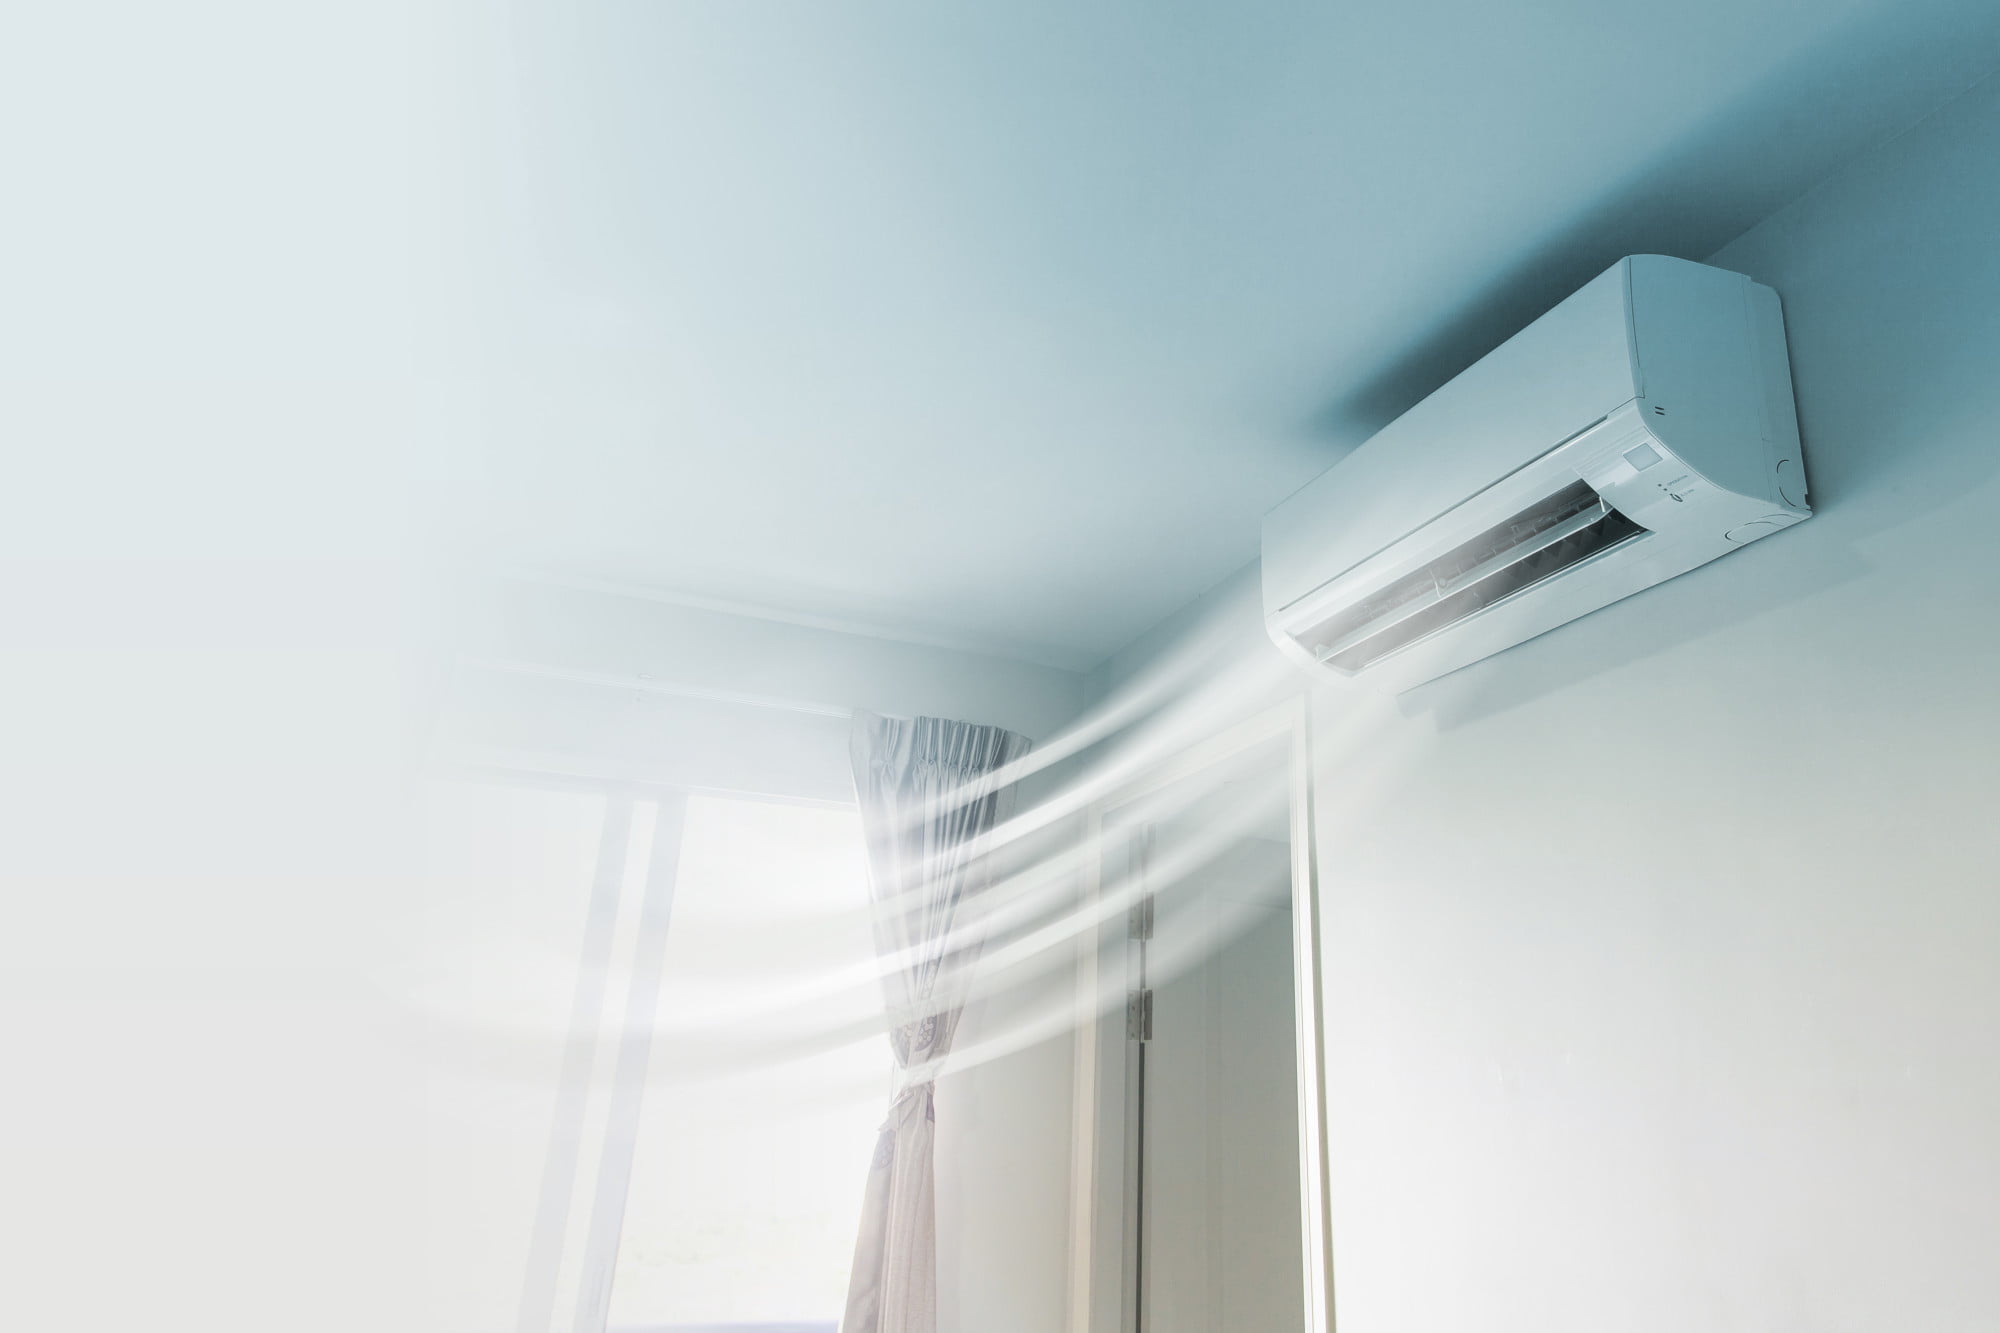 Fitting an older home with ductwork can be an expensive project. A ductless system may be the better solution for you! Here's why.